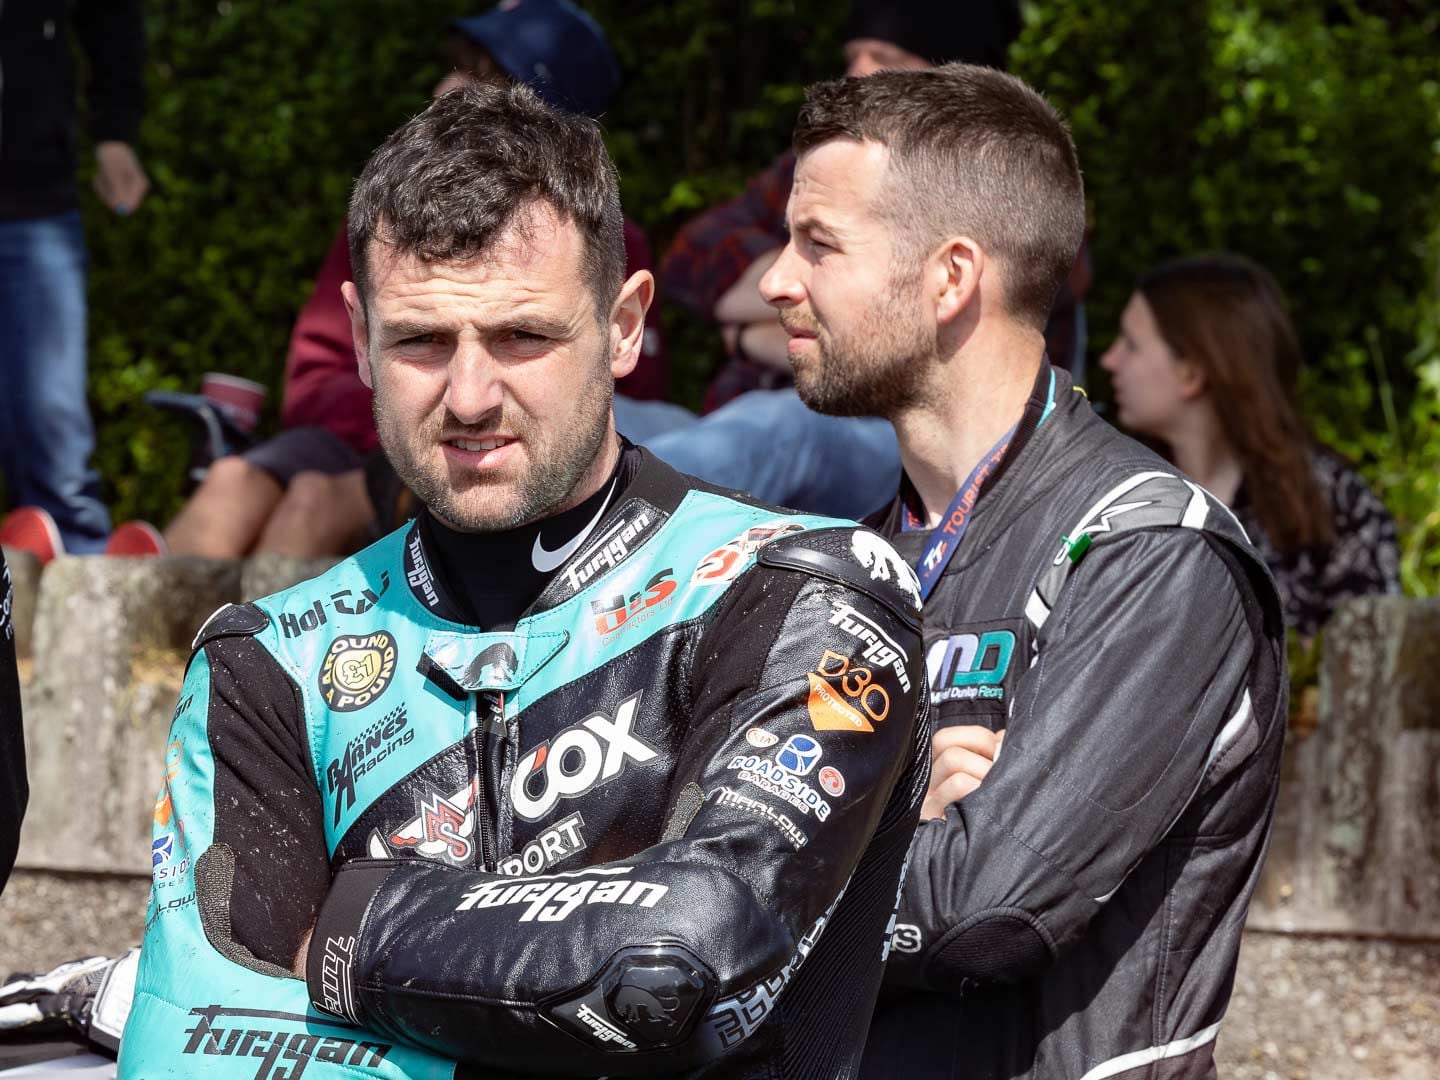 Michael Dunlop in one of his rare moments of relaxation, preparing to head out for his first practice laps of 2023 on his Hawk Racing Honda CBR1000RR-R Superbike.